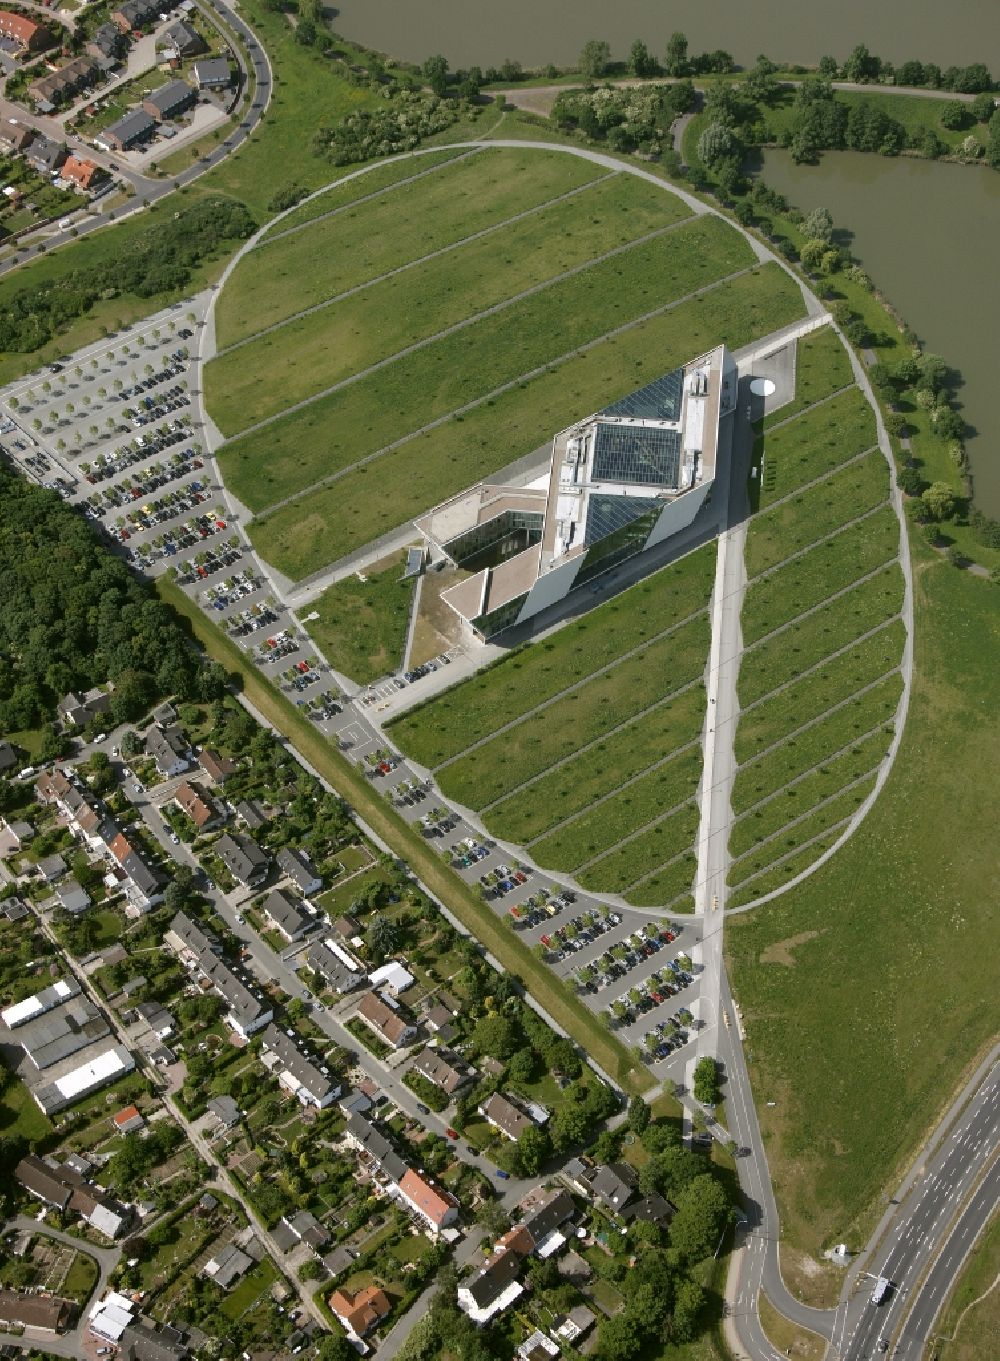 Aerial image Wolfsburg Hageberg - The MobileLifeCampus in the district Hageberg. In the building complex, which was developed and designed by Henn Architekten and opened in 2006, AutoUni and parts of Volkswagen of information technology are housed